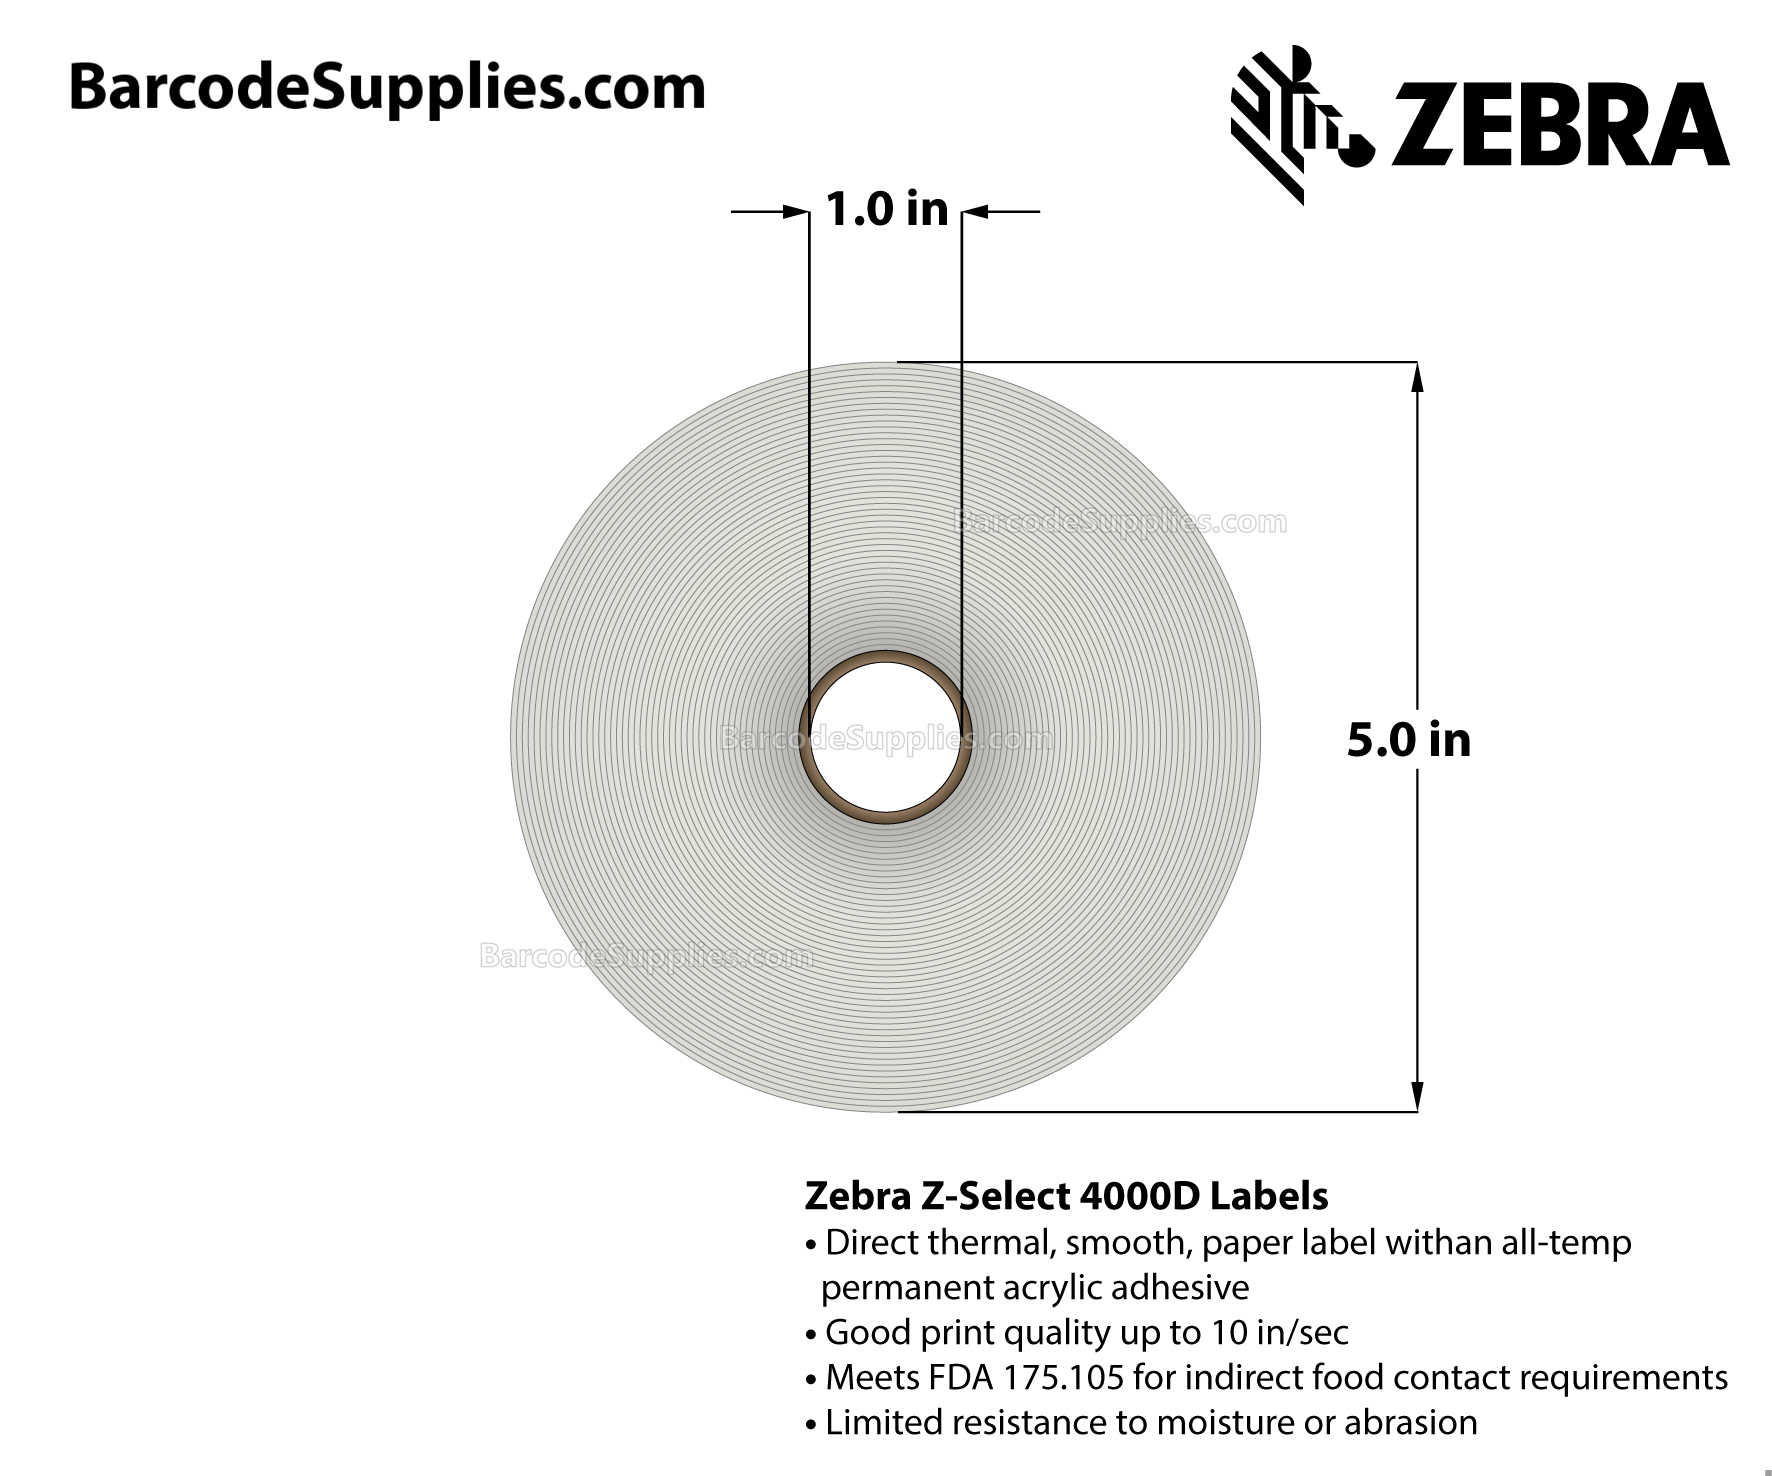 1.25 x 1 Direct Thermal White Z-Select 4000D Labels With All-Temp Adhesive - Perforated - 2340 Labels Per Roll - Carton Of 6 Rolls - 14040 Labels Total - MPN: 10010038